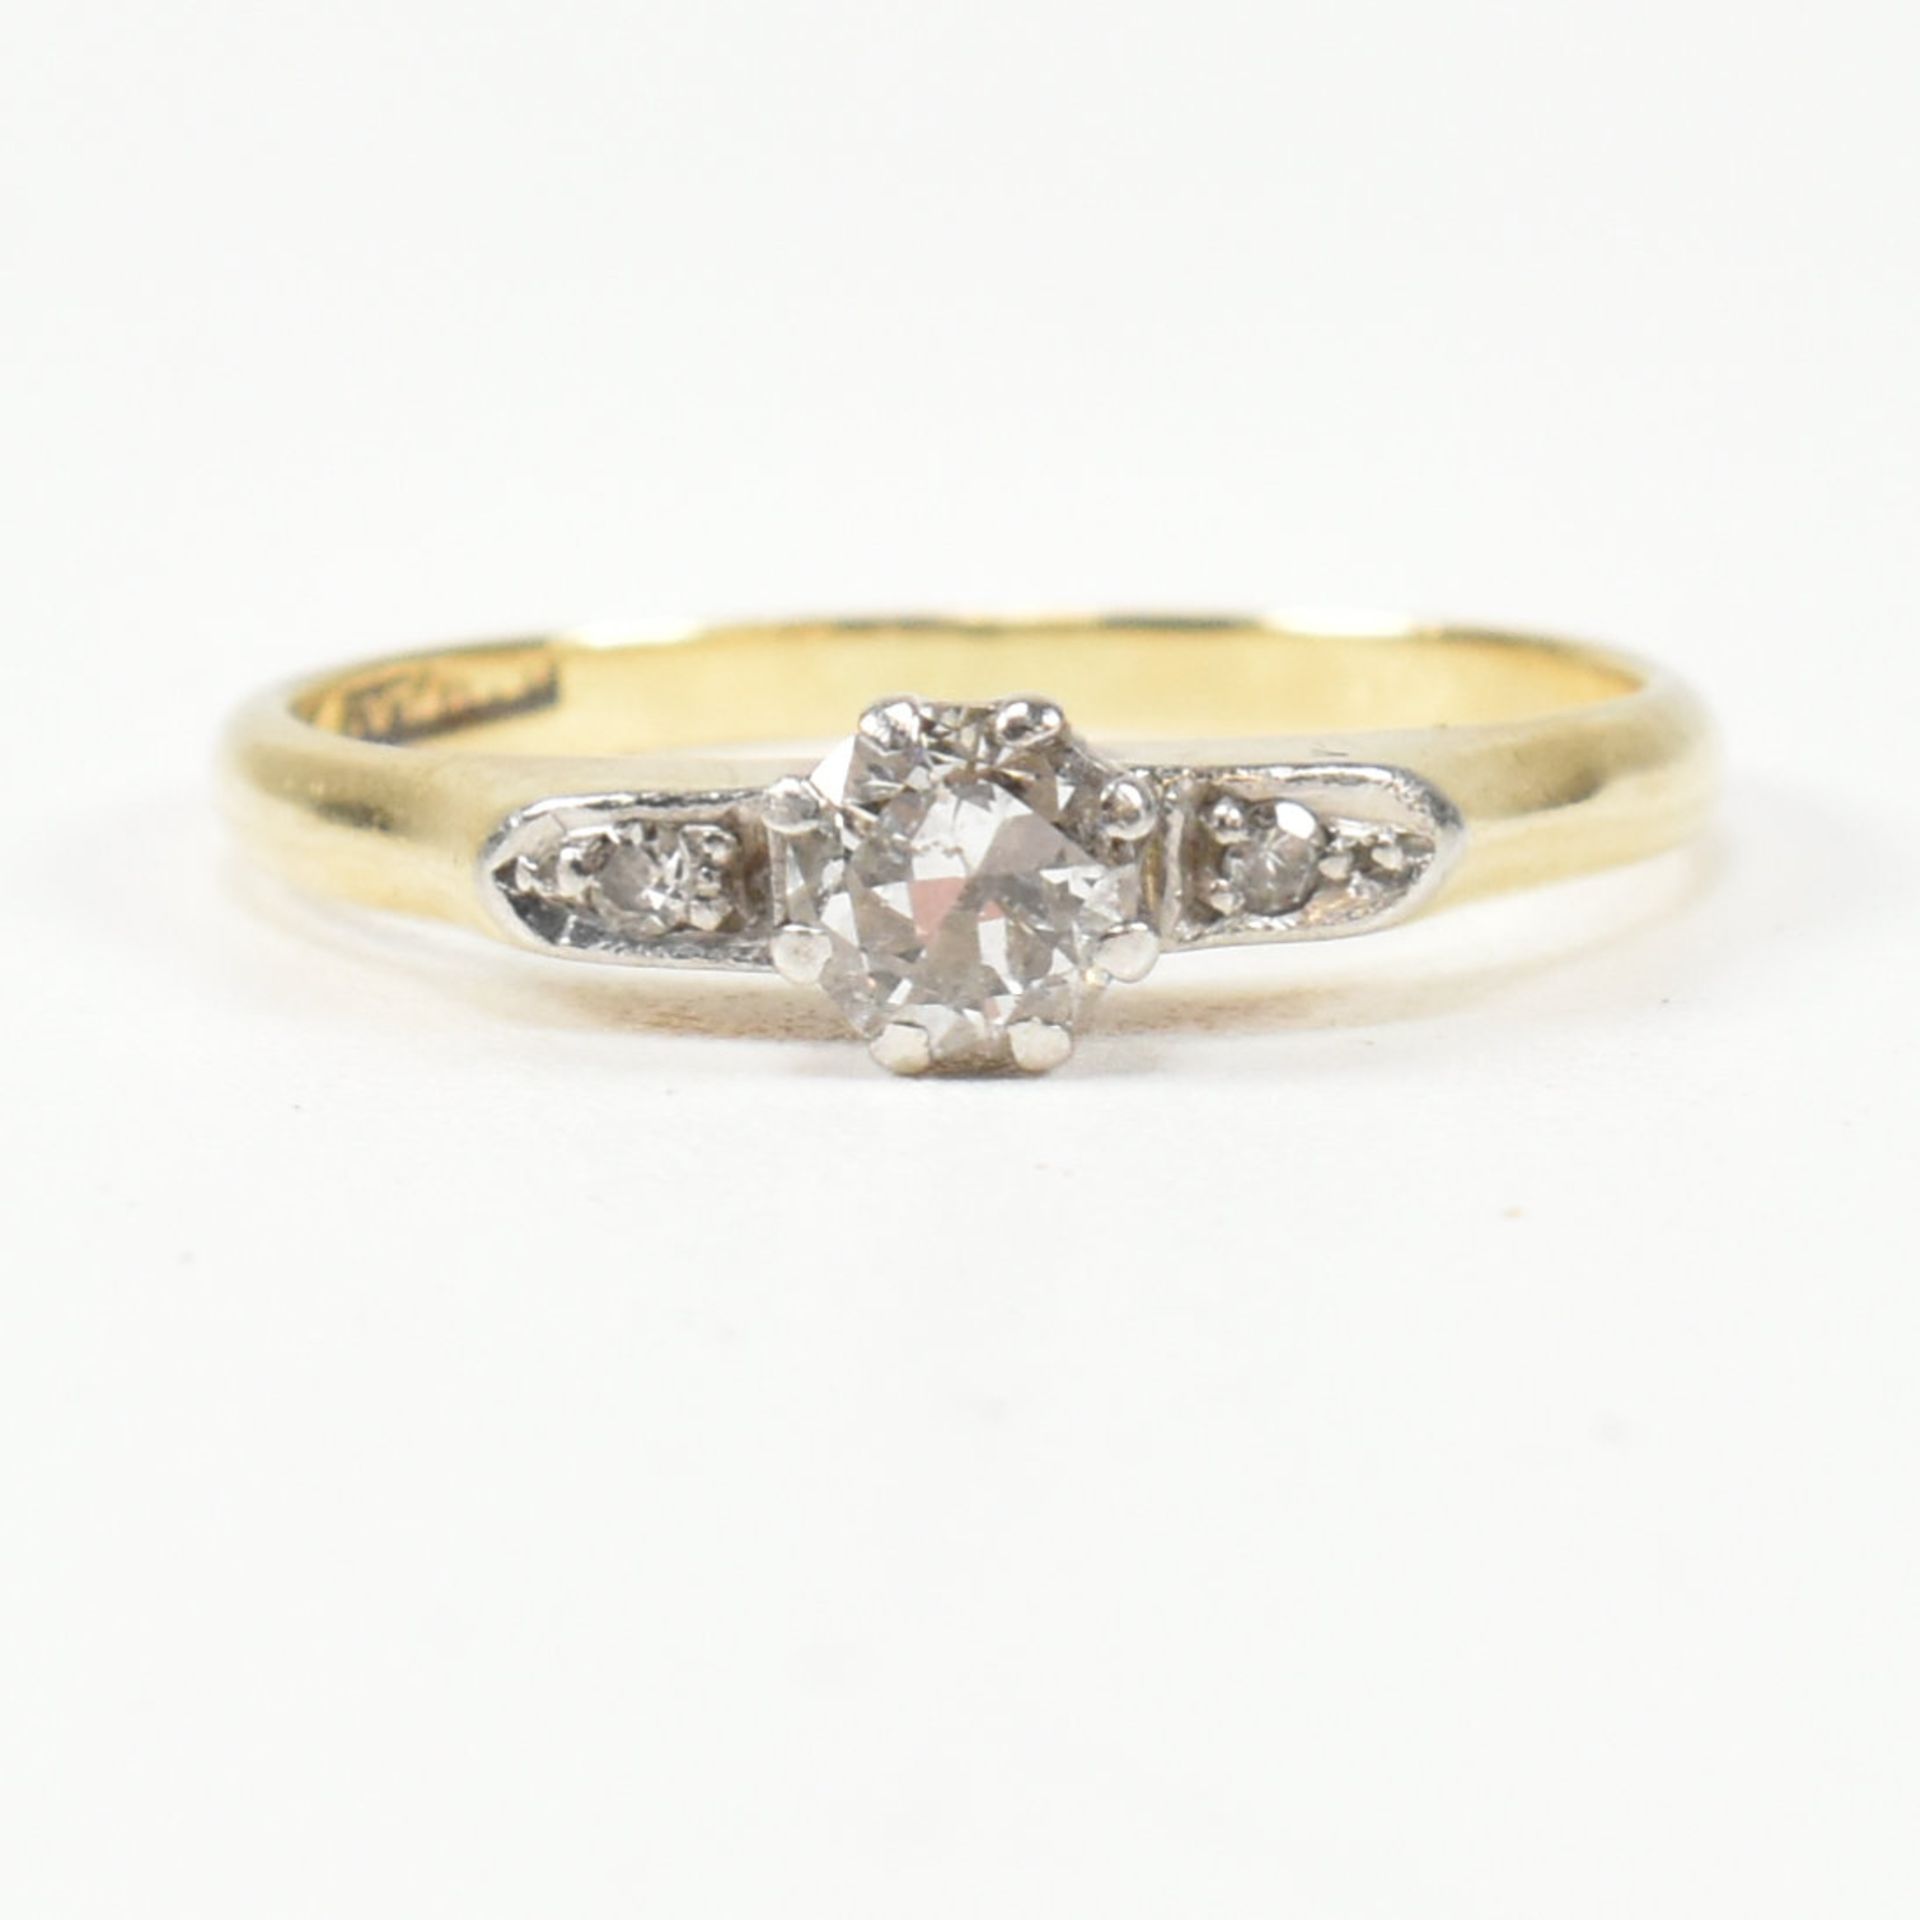 18CT GOLD & DIAMOND SOLITAIRE RING - Image 2 of 8